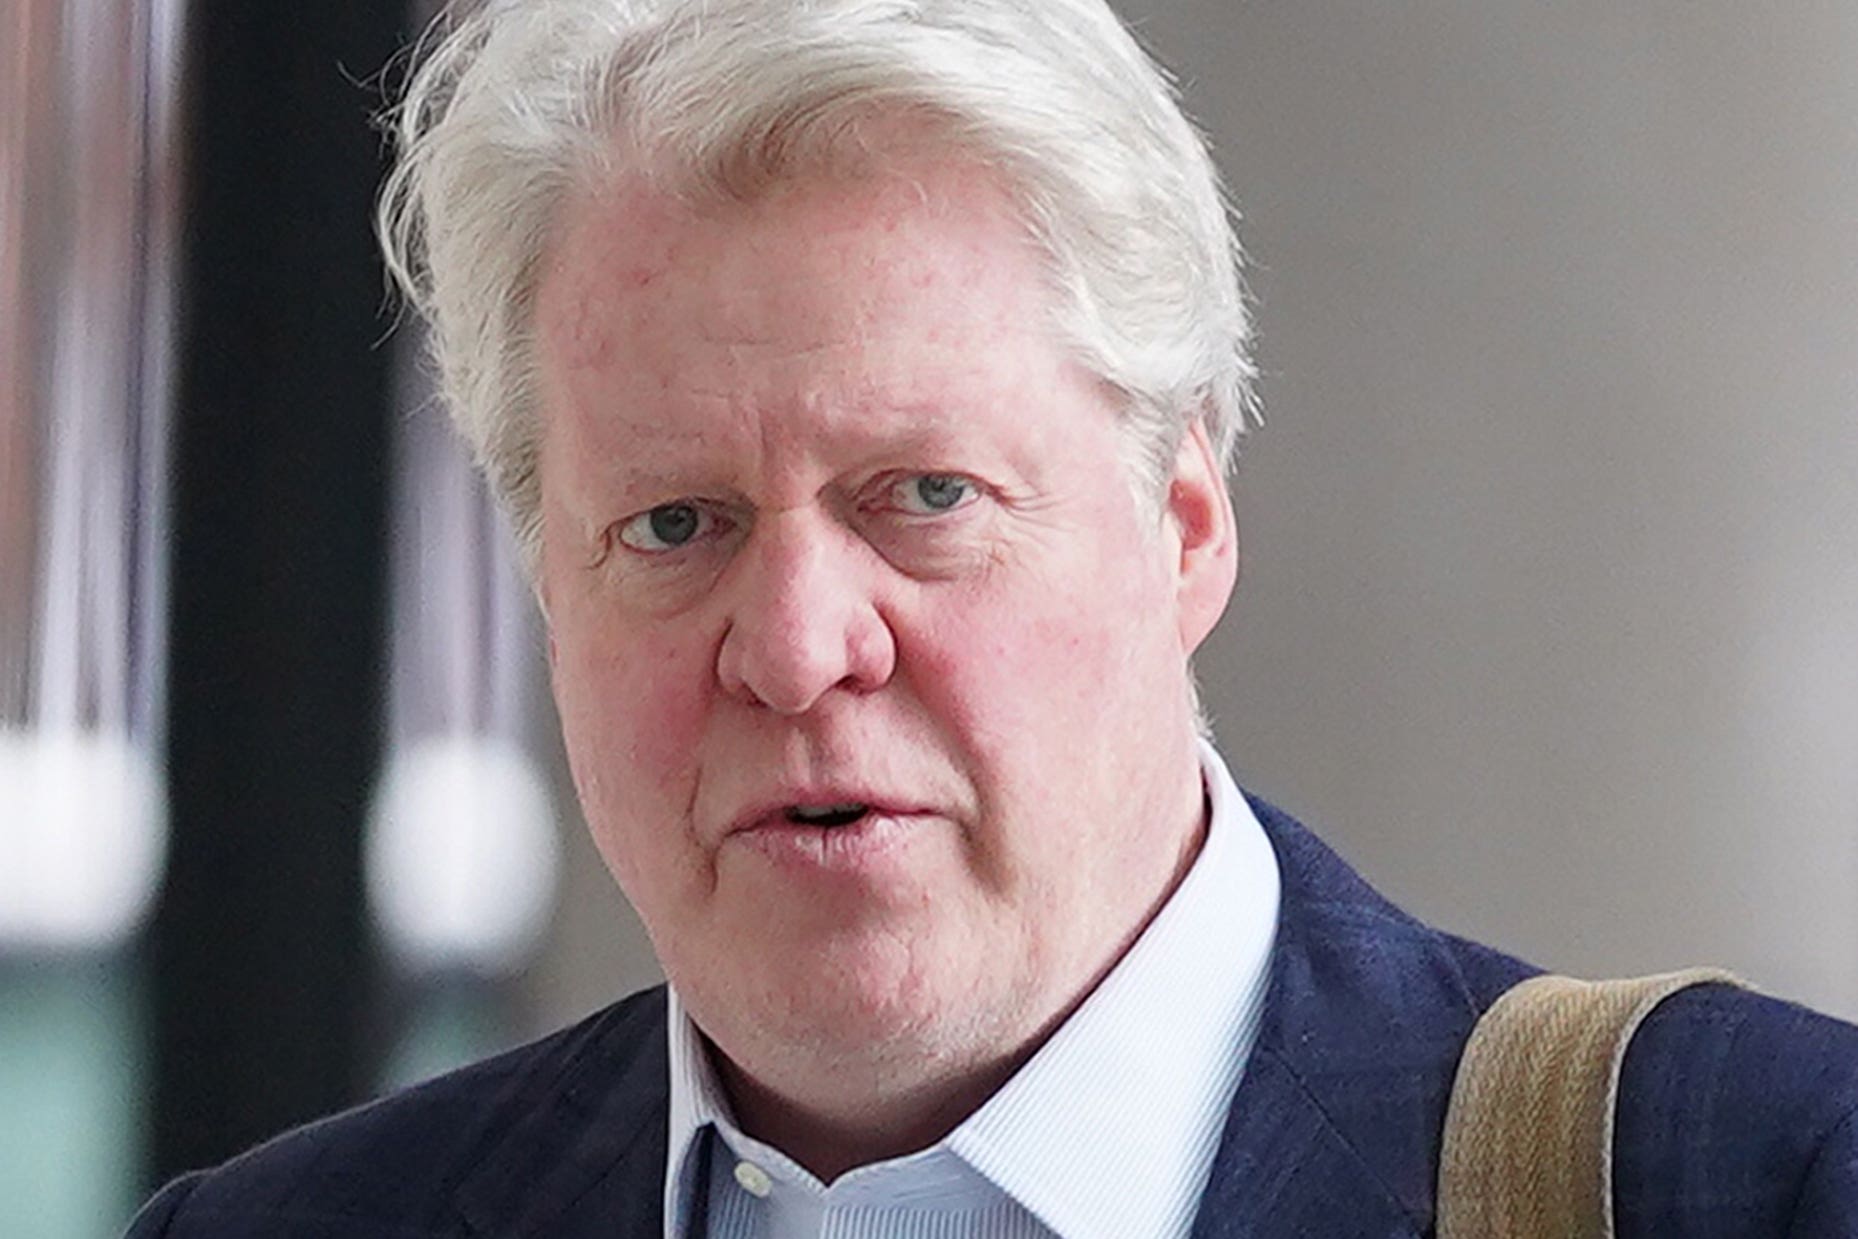 Earl Spencer, the brother of Diana, Princess of Wales, has published his memoir